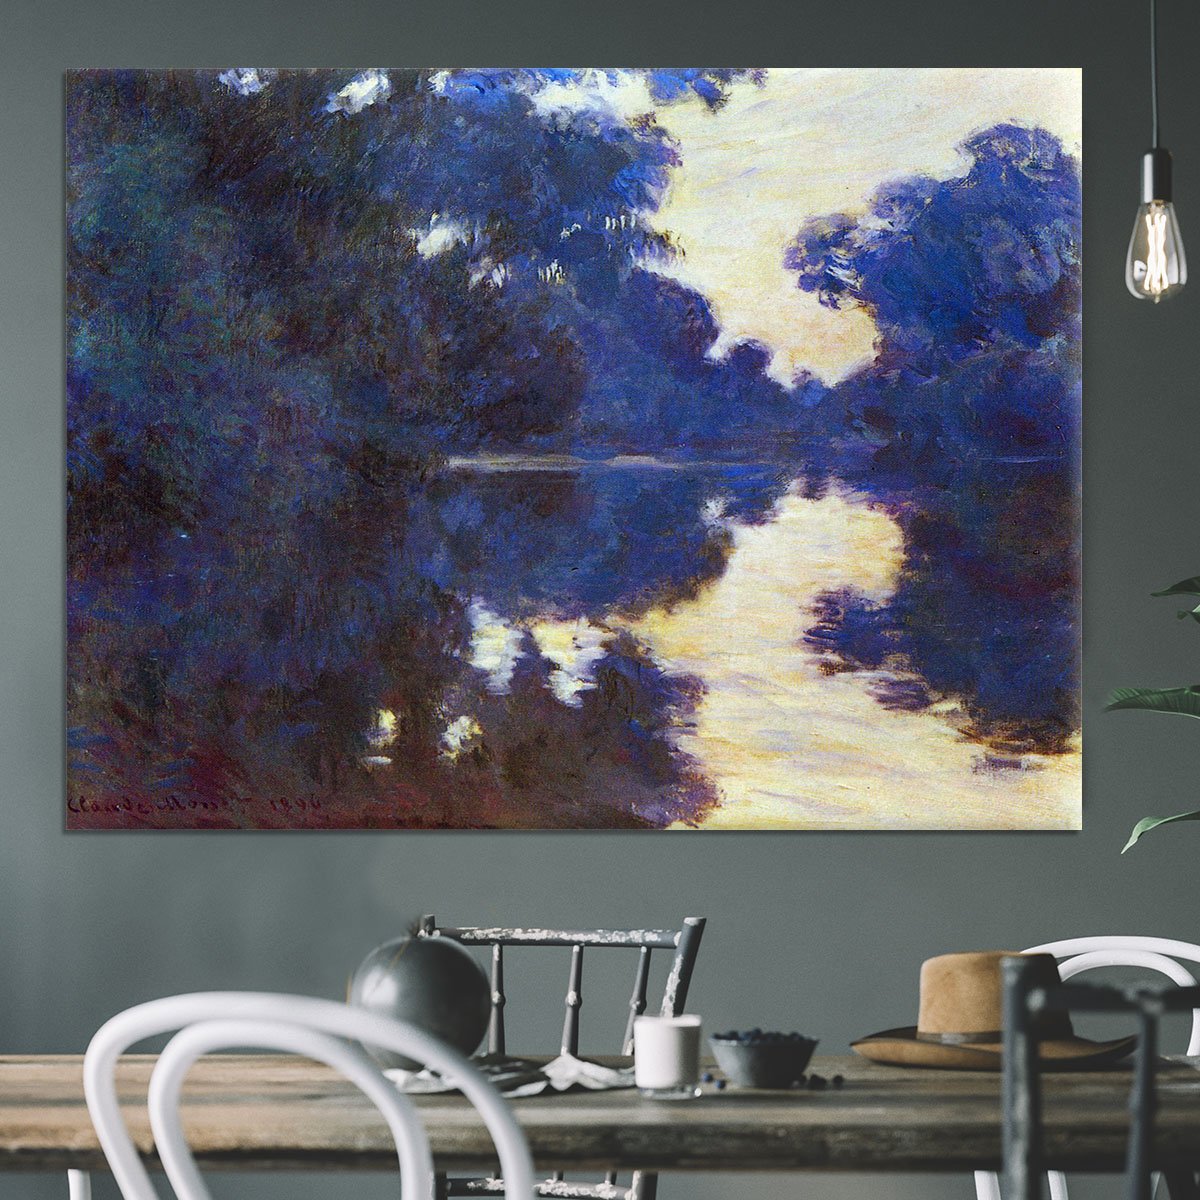 Seine in Morning 2 by Monet Canvas Print or Poster